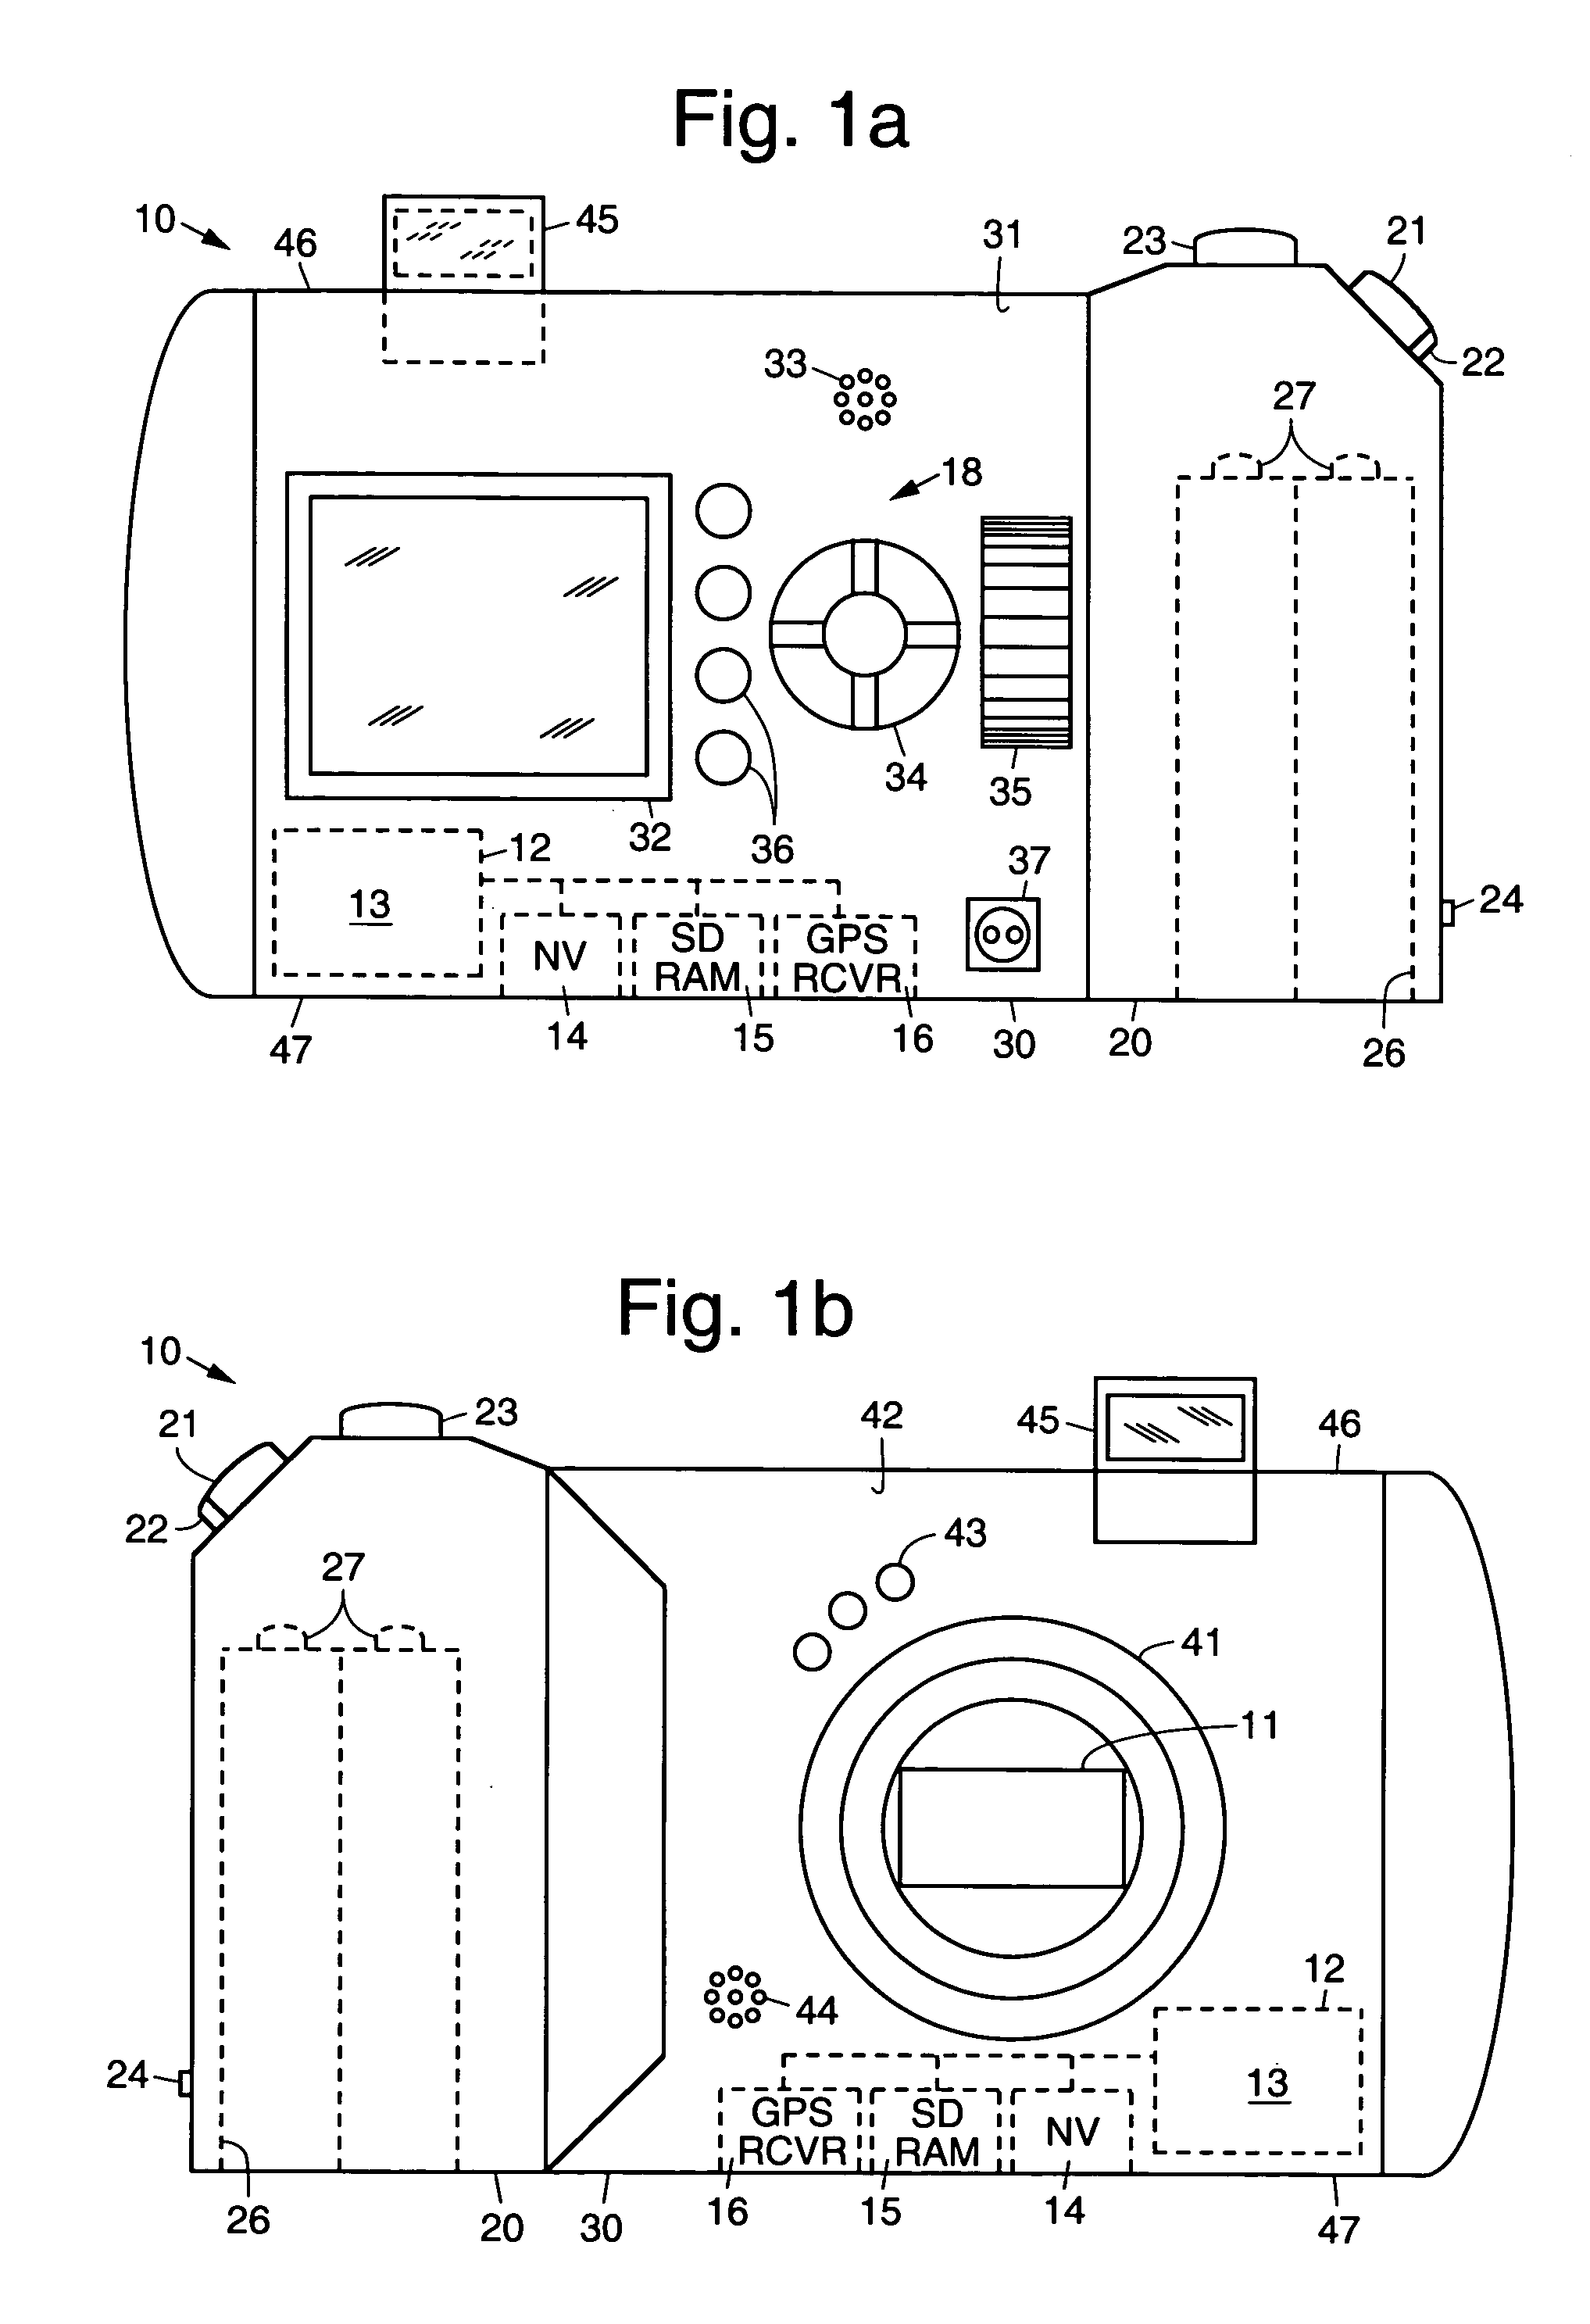 Digital cameras and methods using GPS/time-based and/or location data to provide scene selection, and dynamic illumination and exposure adjustment